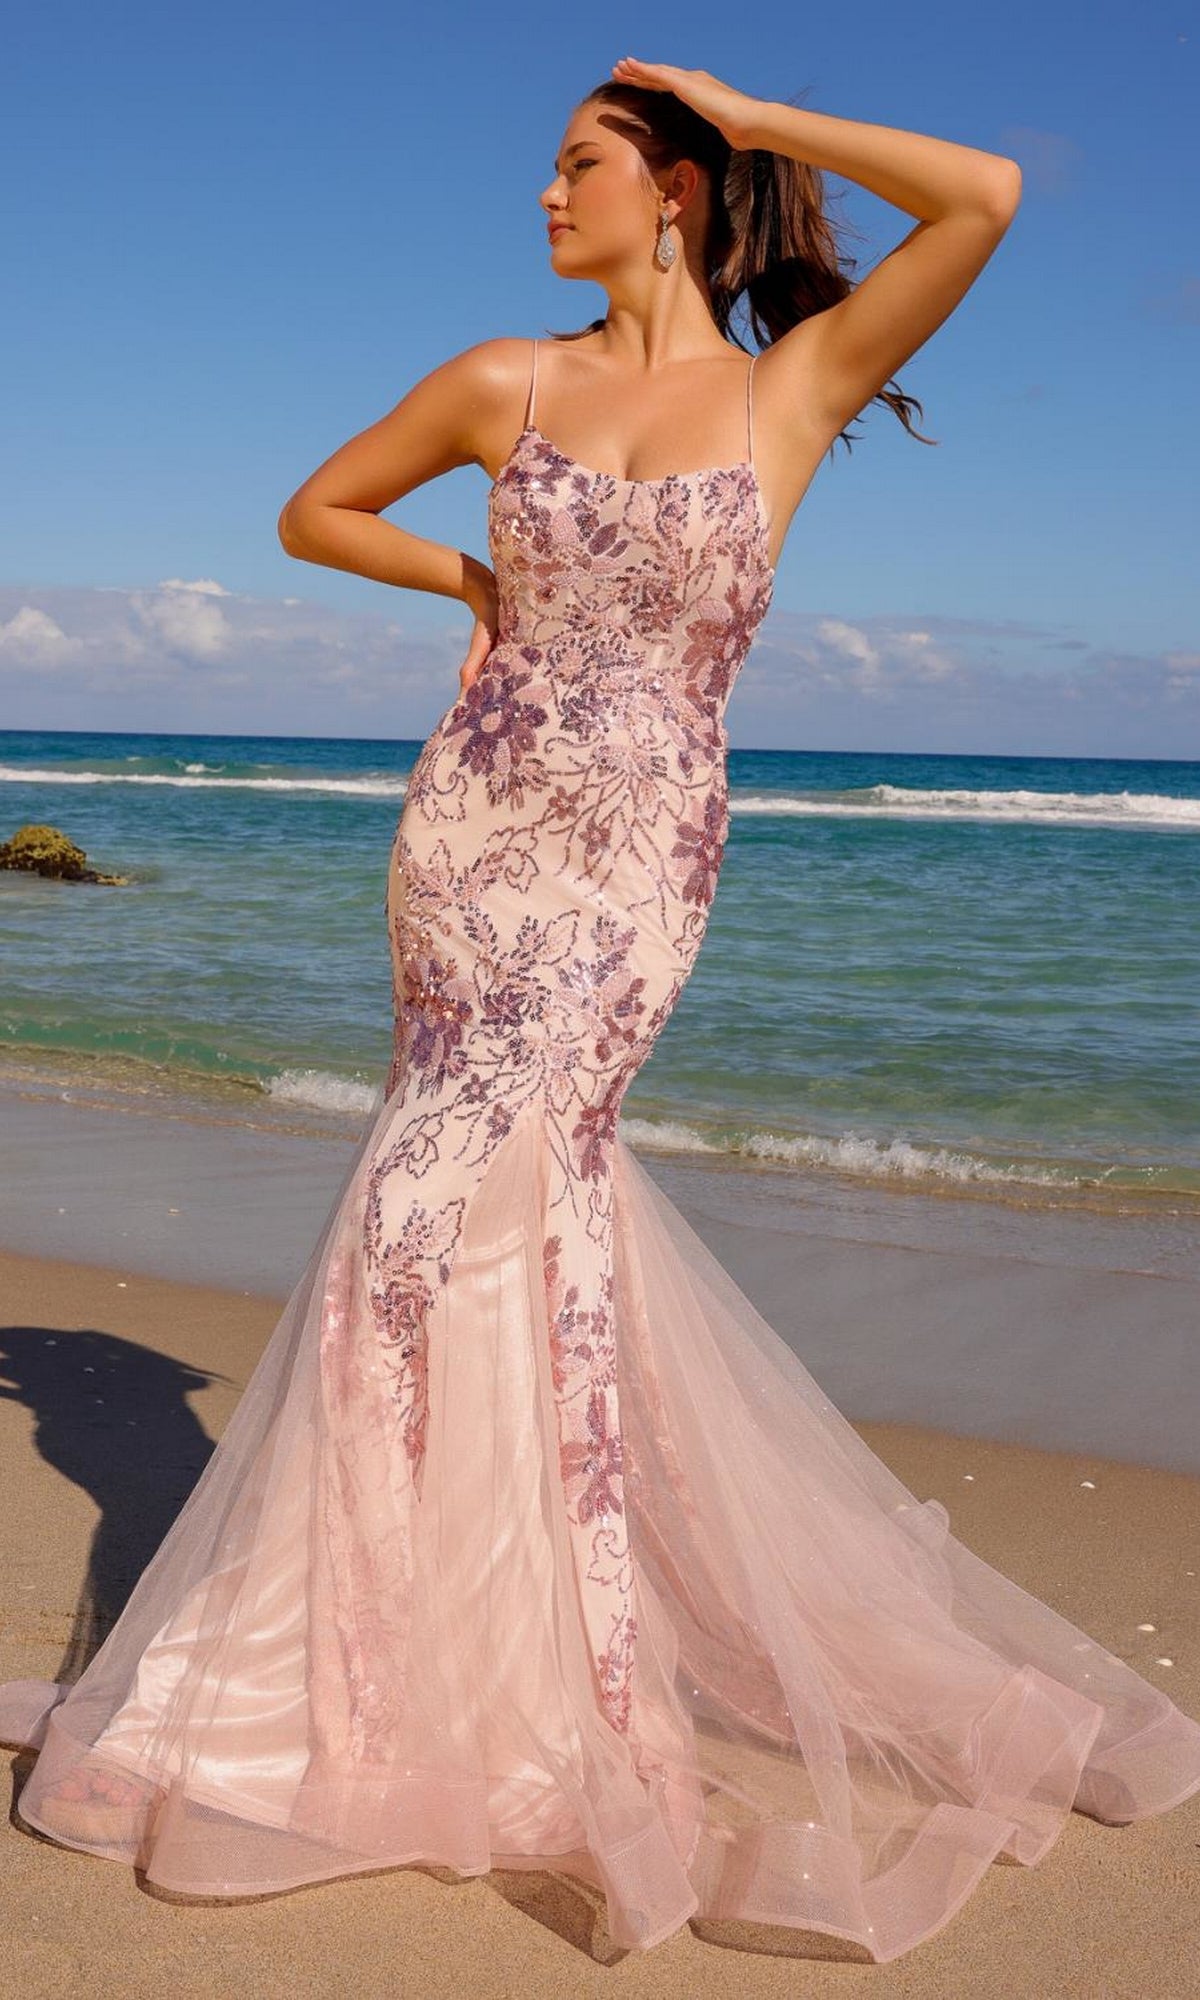 Floral-Sequin Long Mermaid Prom Dress 7038